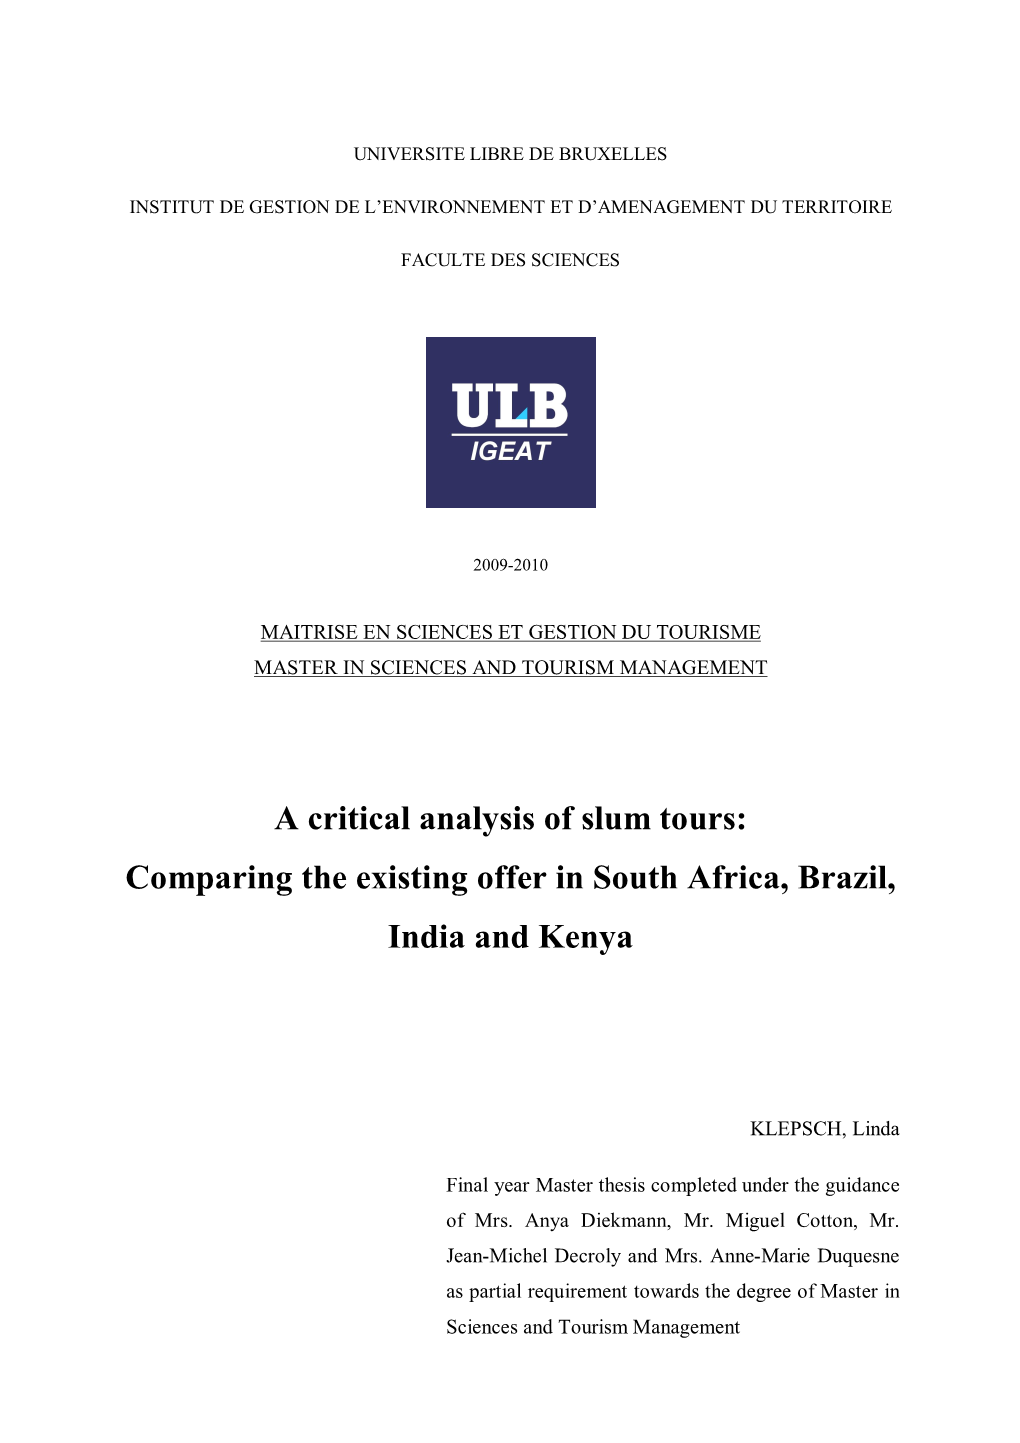 A Critical Analysis of Slum Tours: Comparing the Existing Offer in South Africa, Brazil, India and Kenya